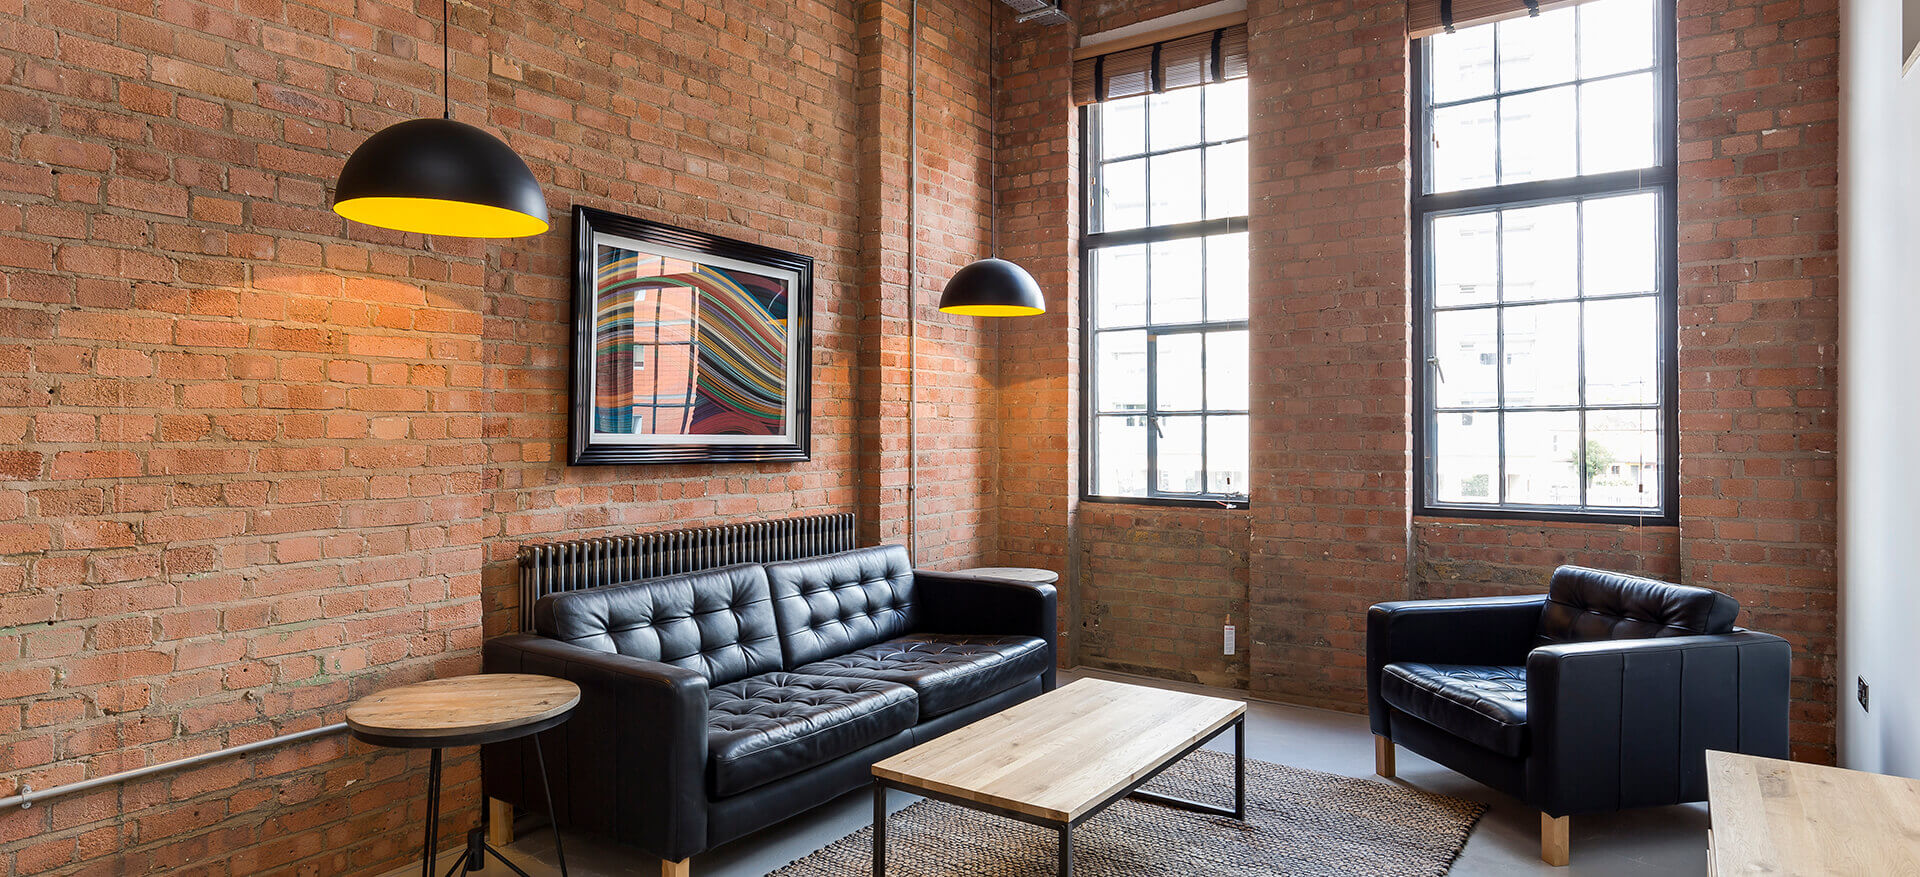 Room with exposed brick wall